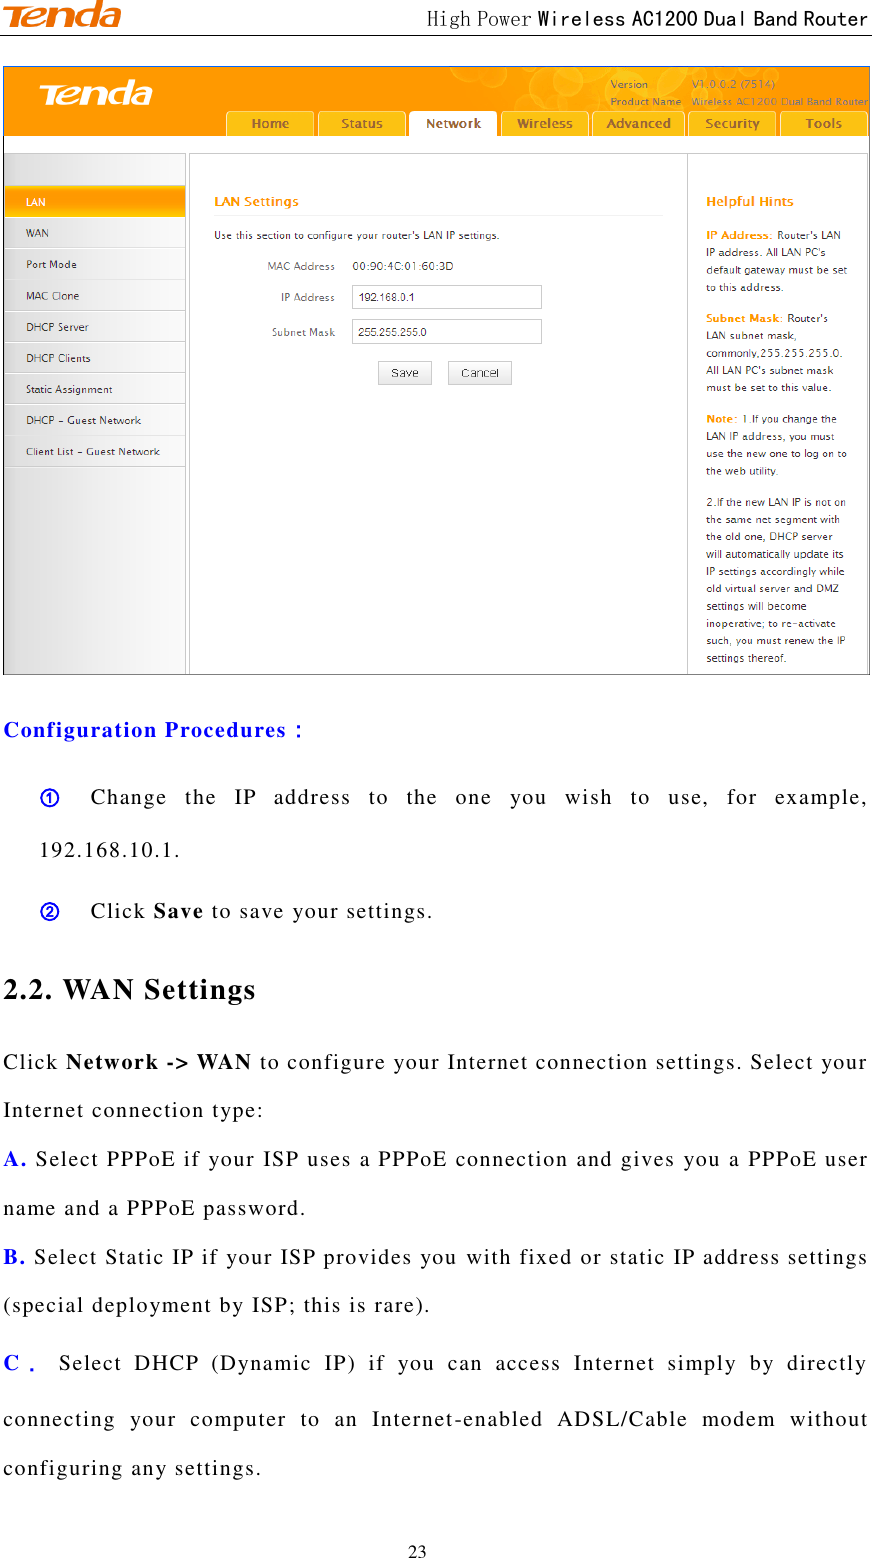                                             High Power Wireless AC1200 Dual Band Router 23  Configuration Procedures： ① Change  the  IP  address  to  the  one  you  wish  to  use,  for  example, 192.168.10.1. ② Click Save to save your settings. 2.2. WAN Settings Click Network -&gt; WAN to configure your Internet connection settings. Select your Internet connection type: A. Select PPPoE if your ISP uses a PPPoE connection and gives you a PPPoE user name and a PPPoE password. B. Select Static IP if your ISP provides you with fixed or static IP address settings (special deployment by ISP; this is rare). C． Select  DHCP  (Dynamic  IP)  if  you  can  access  Internet  simply  by  directly connecting  your  computer  to  an  Internet-enabled  ADSL/Cable  modem  without configuring any settings. 